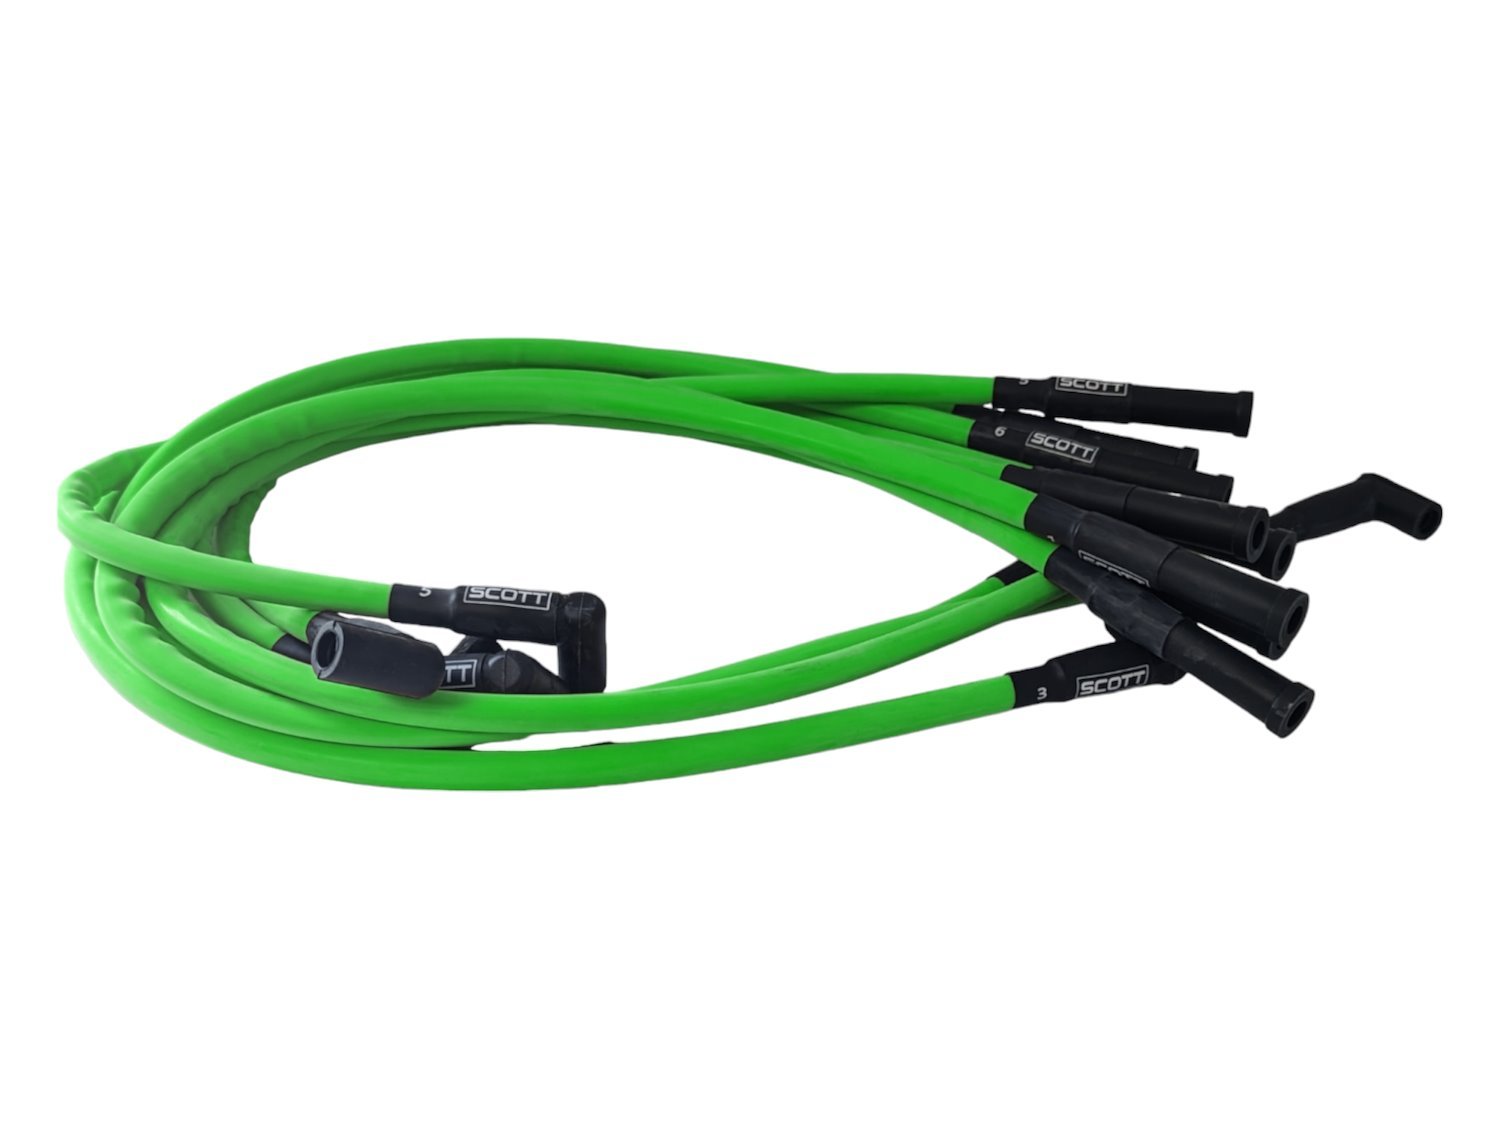 SPW300-CH-421-8 Super Mag Fiberglass-Oversleeved Spark Plug Wire Set for Small Block Chevy, Over Valve Cover [Green]